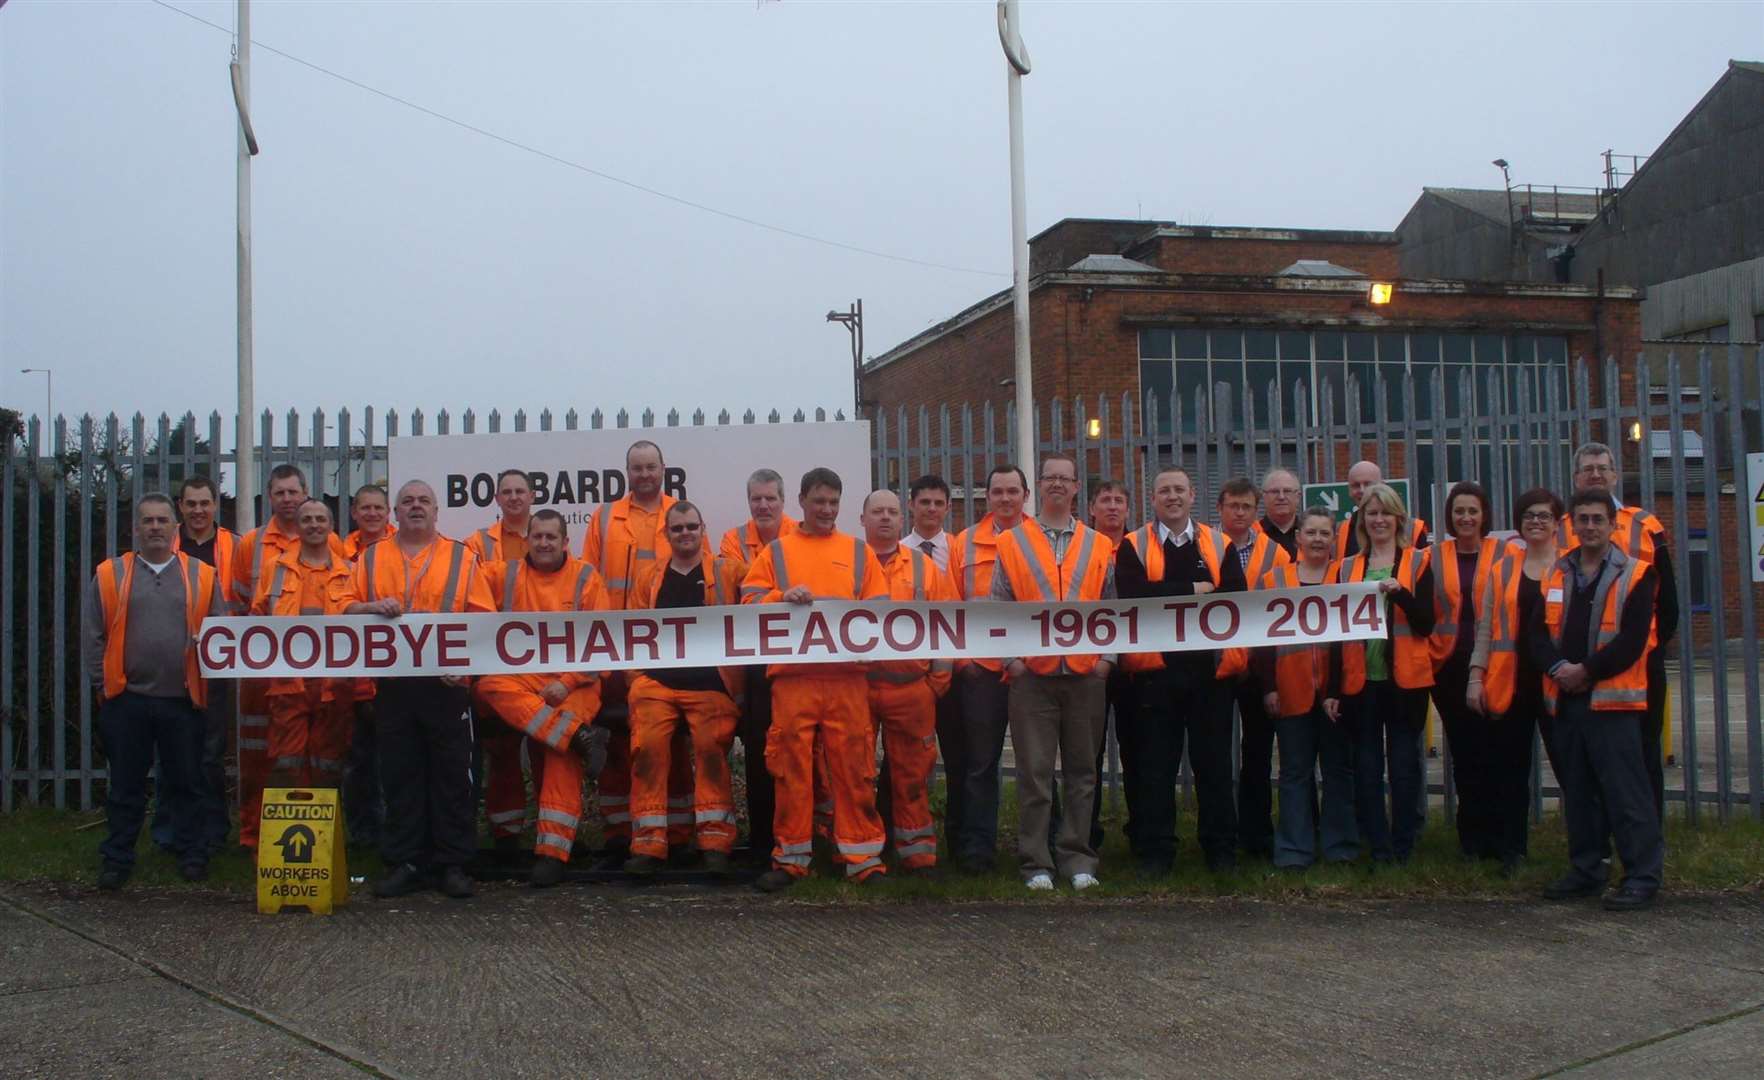 The remaining workforce of Bombardier's Chart Leacon rail depot gather to mark its closure in 2014